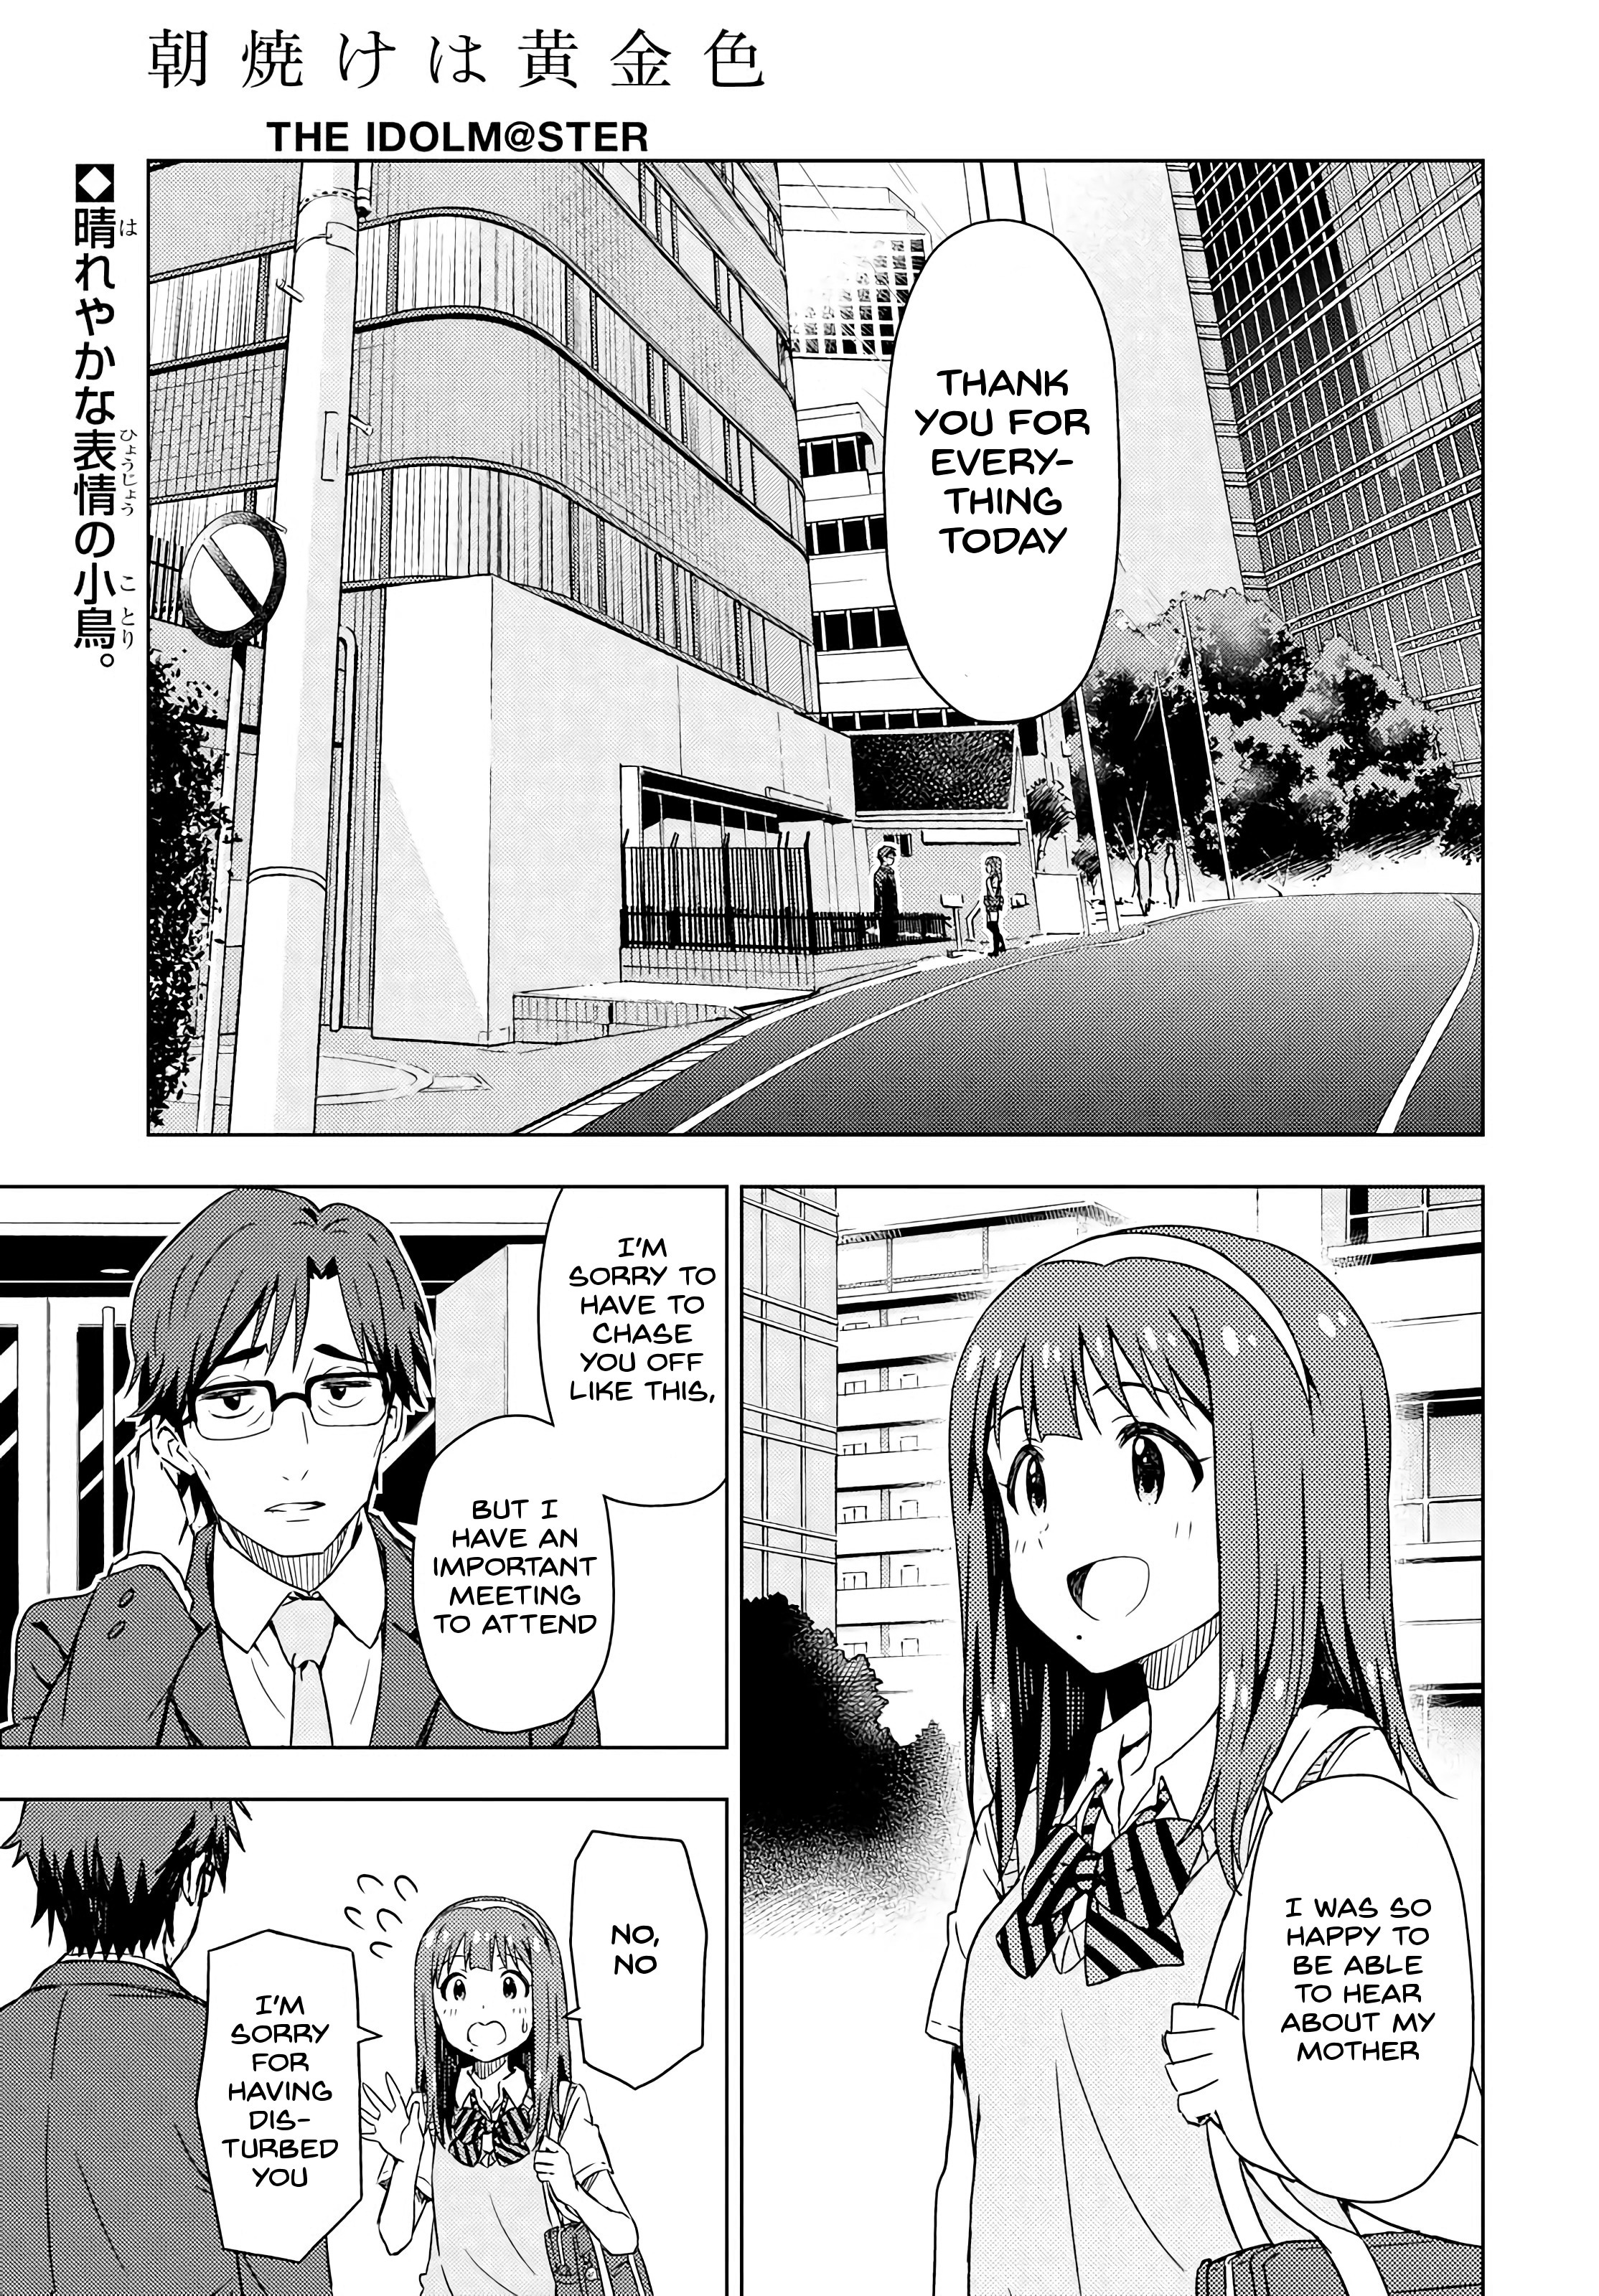 The Idolm@ster: Asayake Wa Koganeiro Chapter 5: Carrying The Wishes Of Her Mother… She Moves Forward. - Picture 1